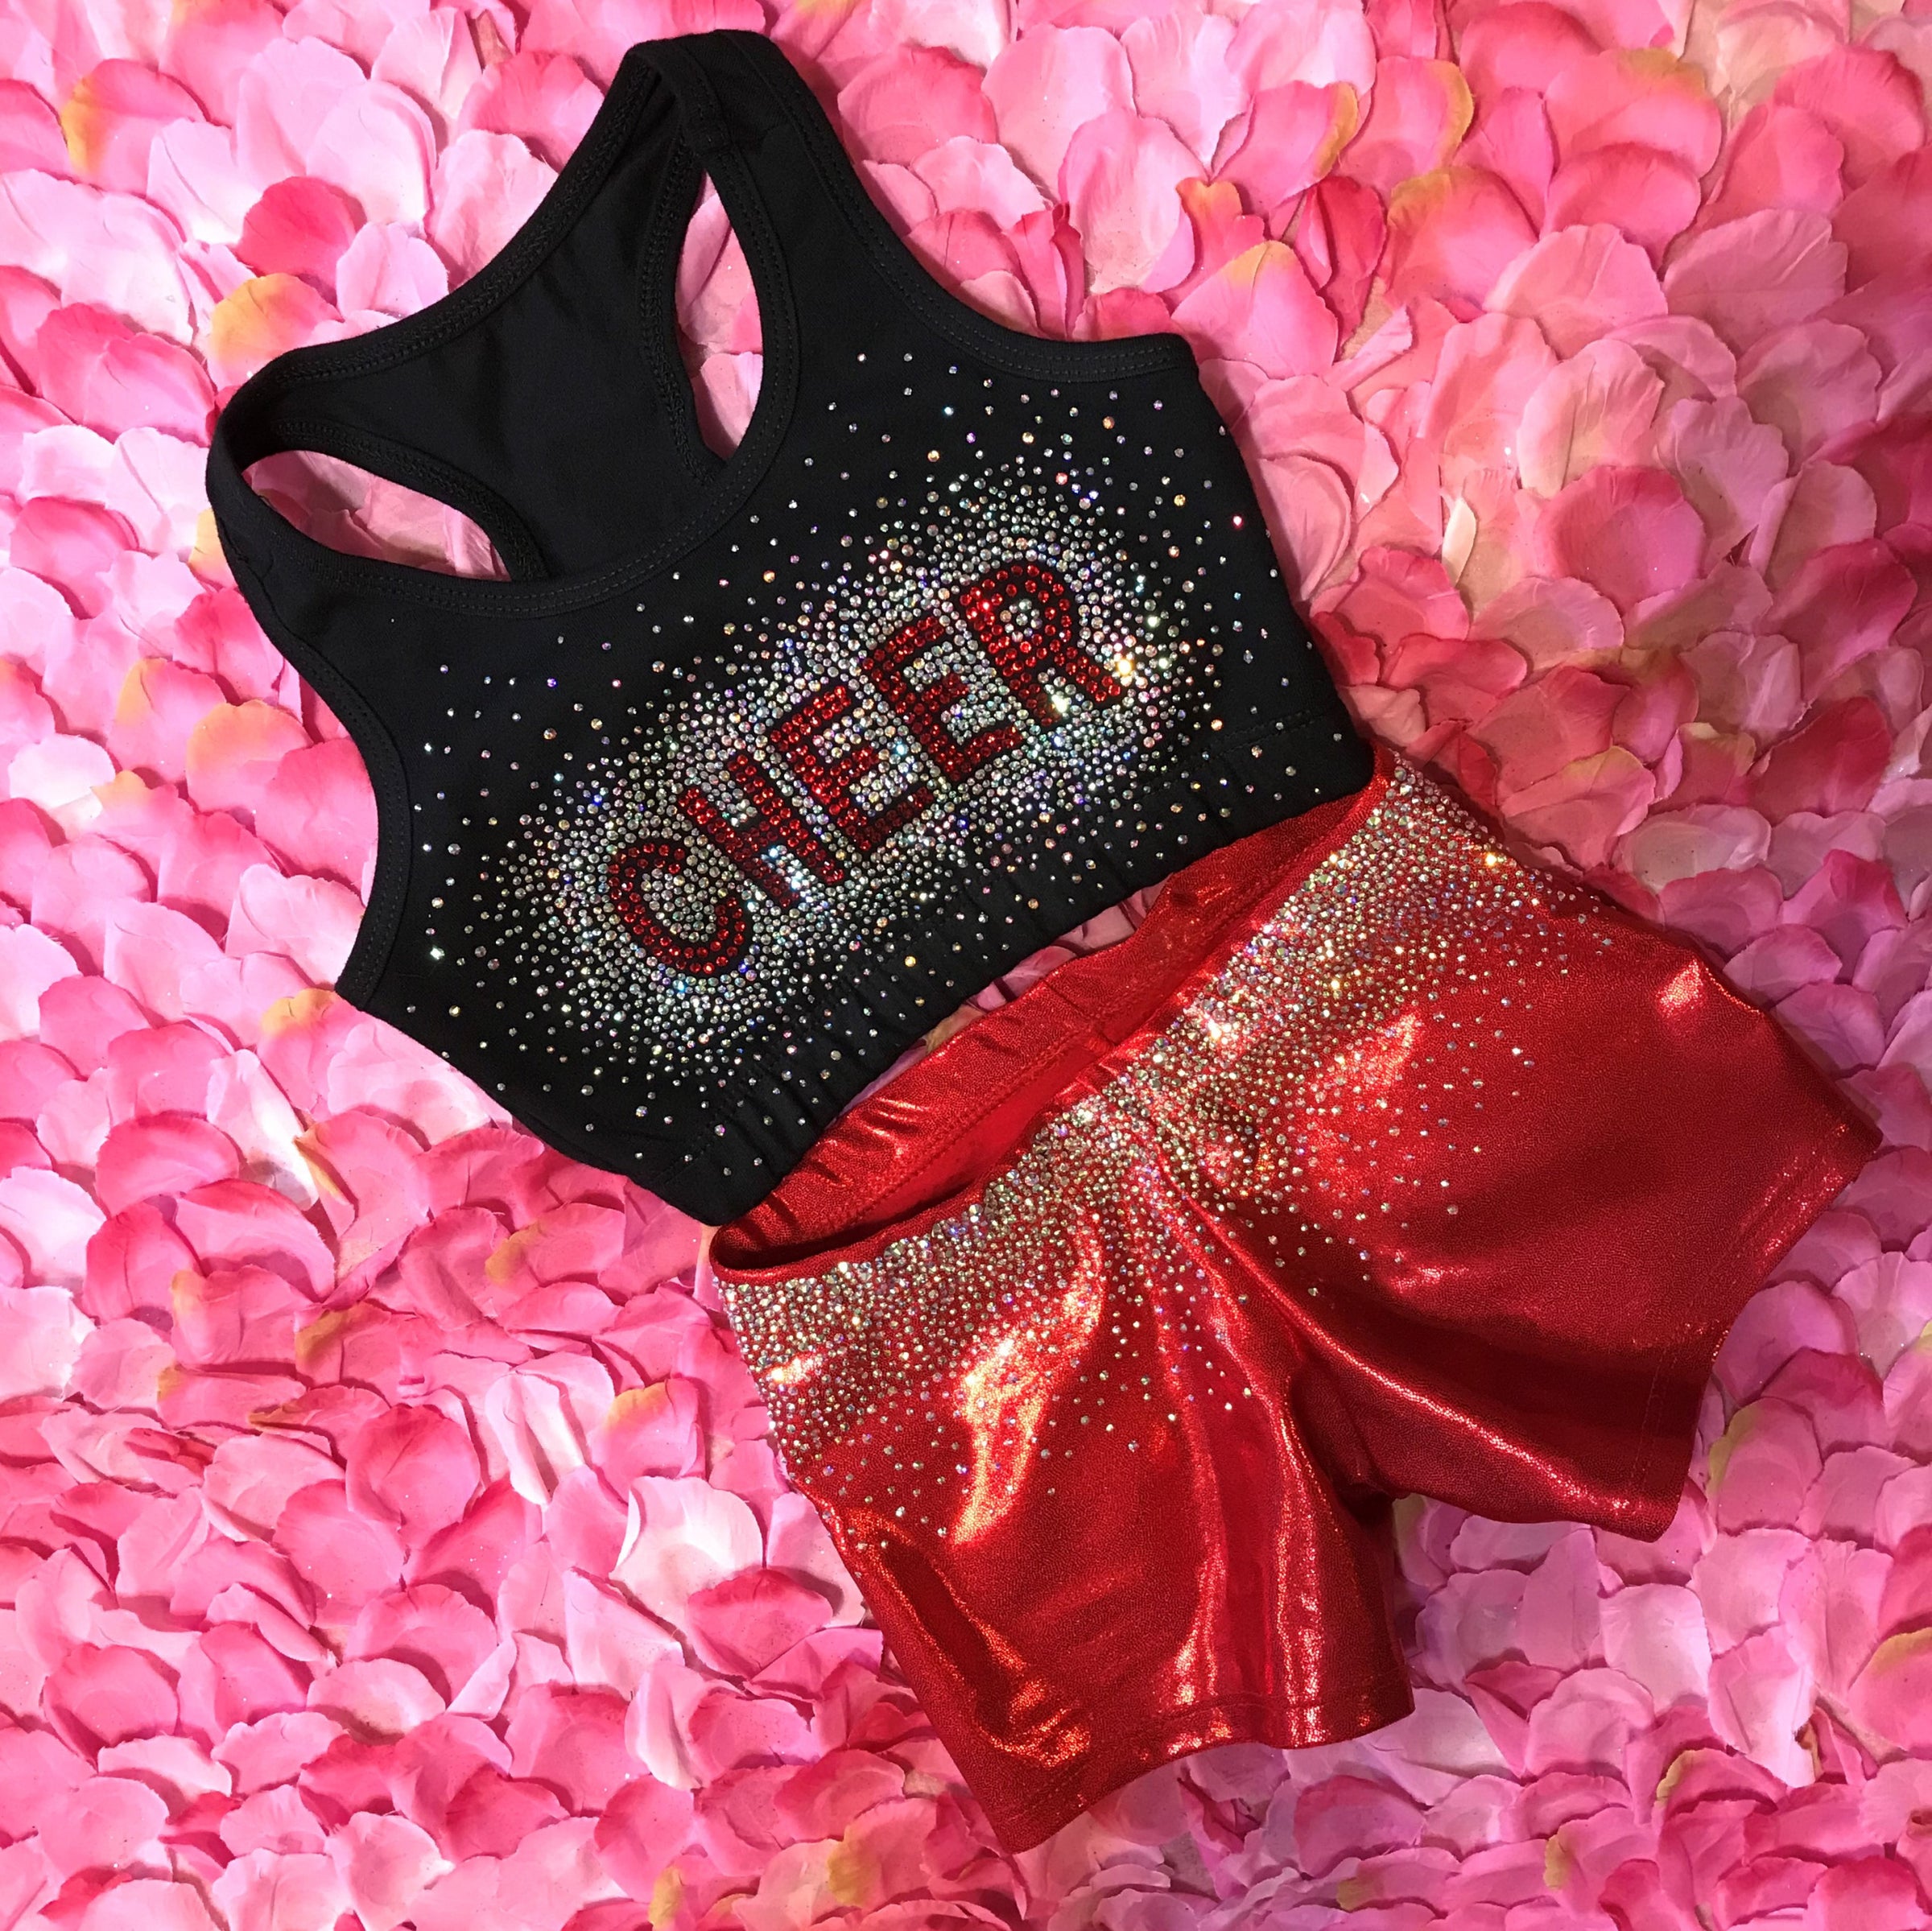 Rhinestone Cheer in Red Practice Bra & Iced Out Ombré Mystique Red